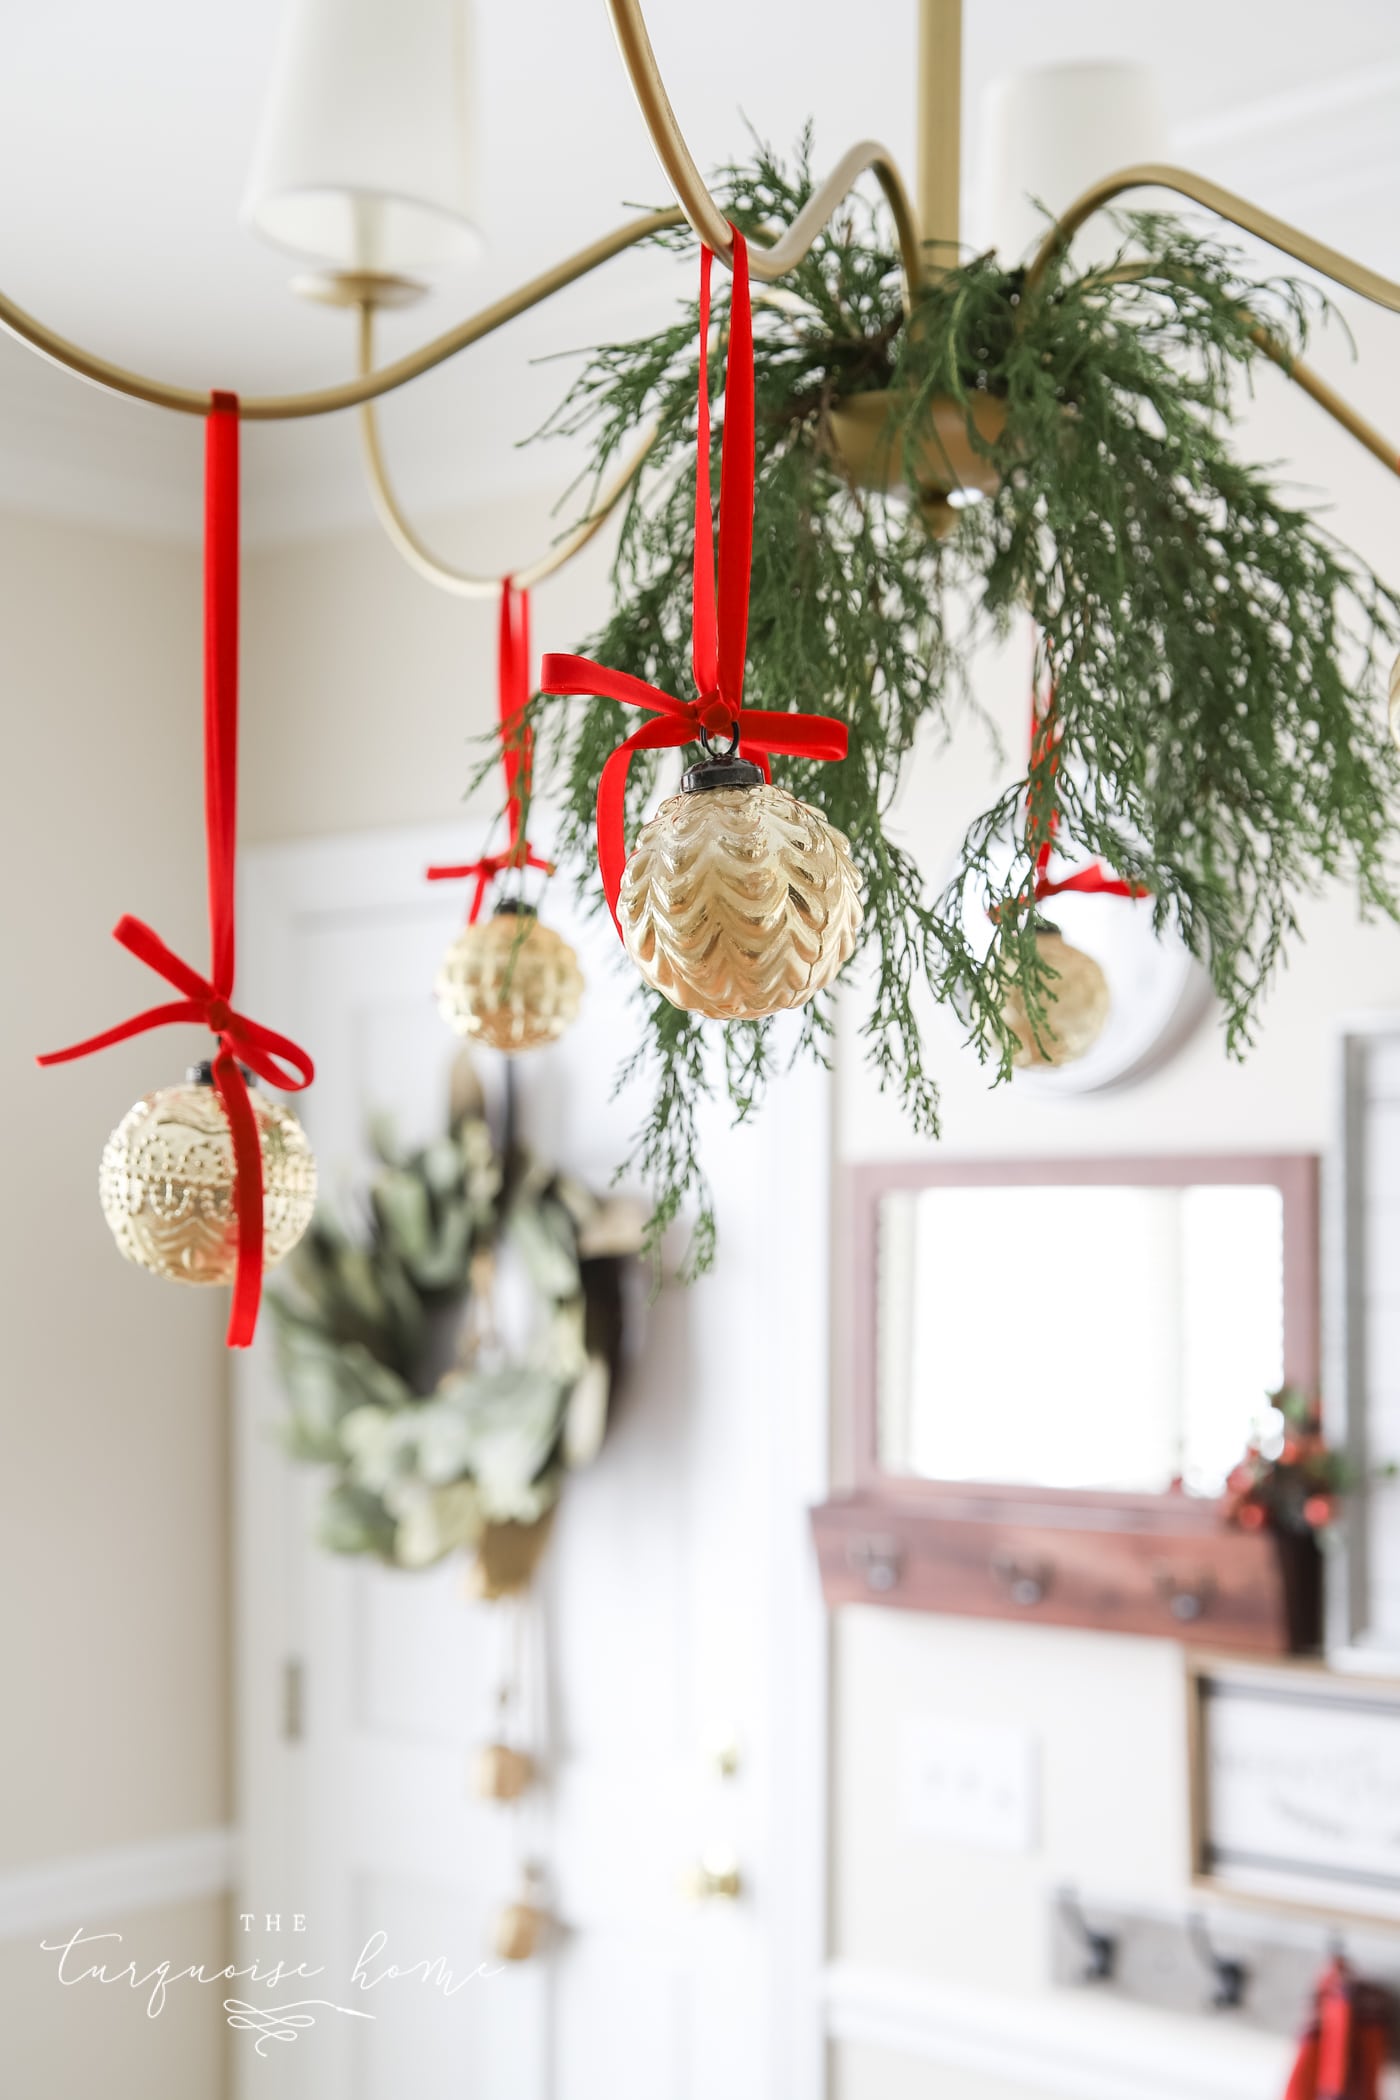 7+ Ways to Decorate with Christmas Ribbon {Sources & Ideas!}